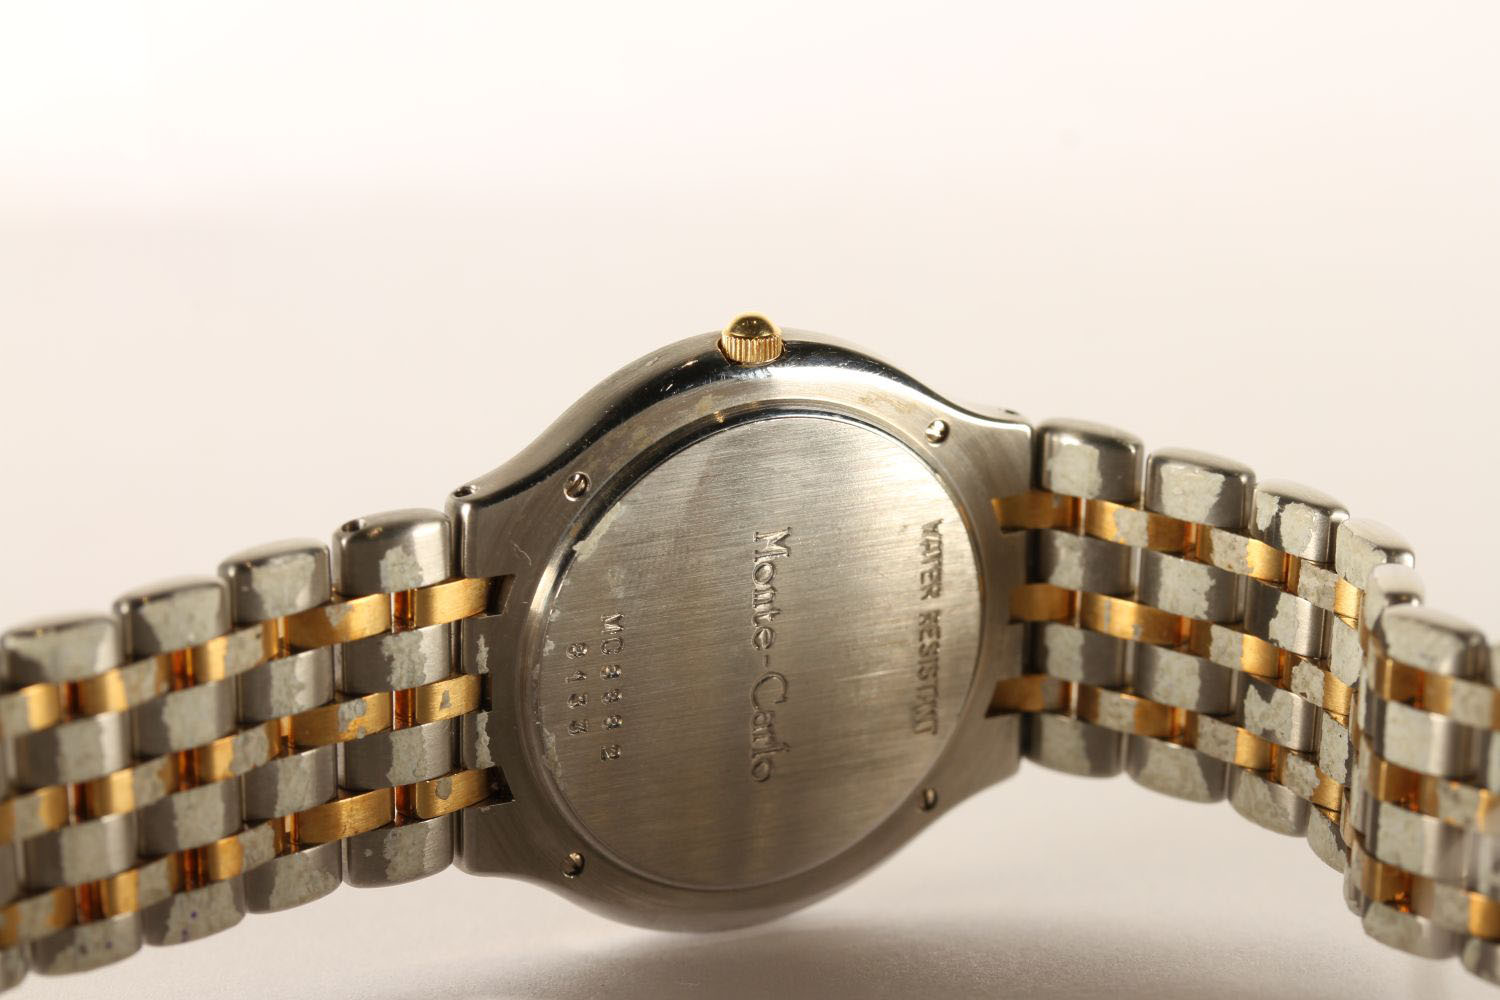 UNISEX CHOPARD BI COLOUR MONTE CARLO WRISTWATCH, circular grey dial with gold baton hour markers and - Image 5 of 5